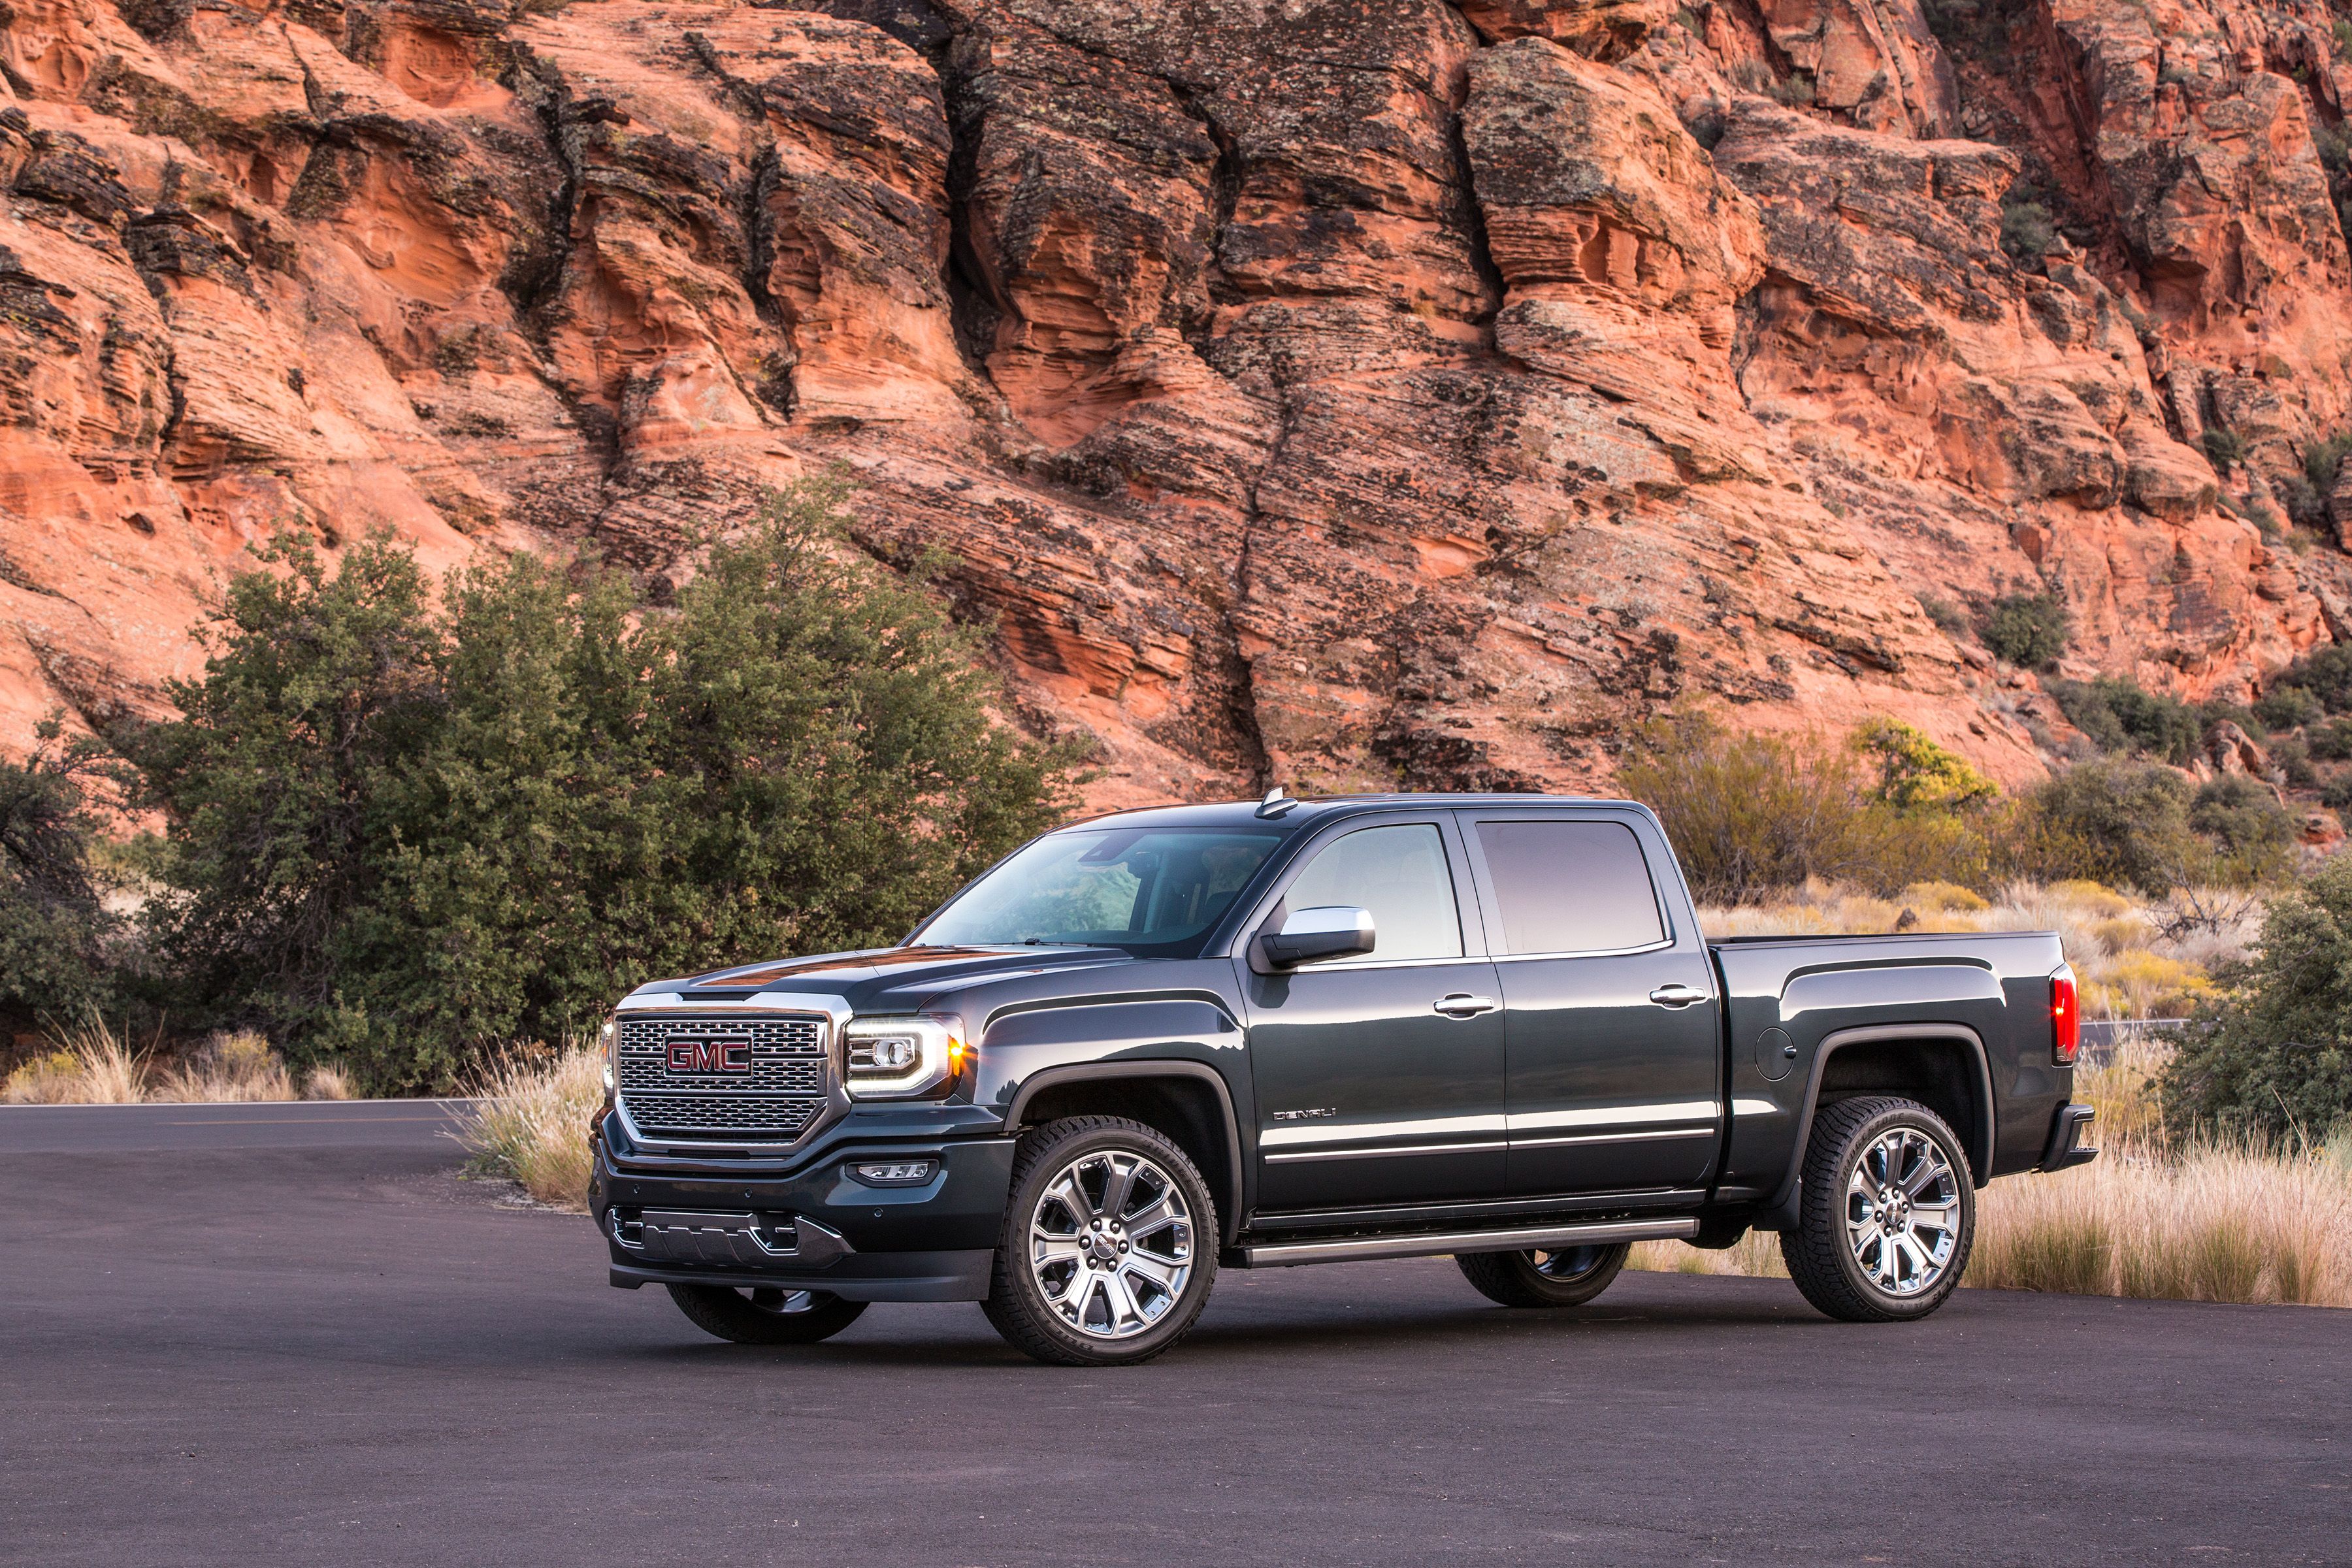 The 2018 GMC Sierra on the road.